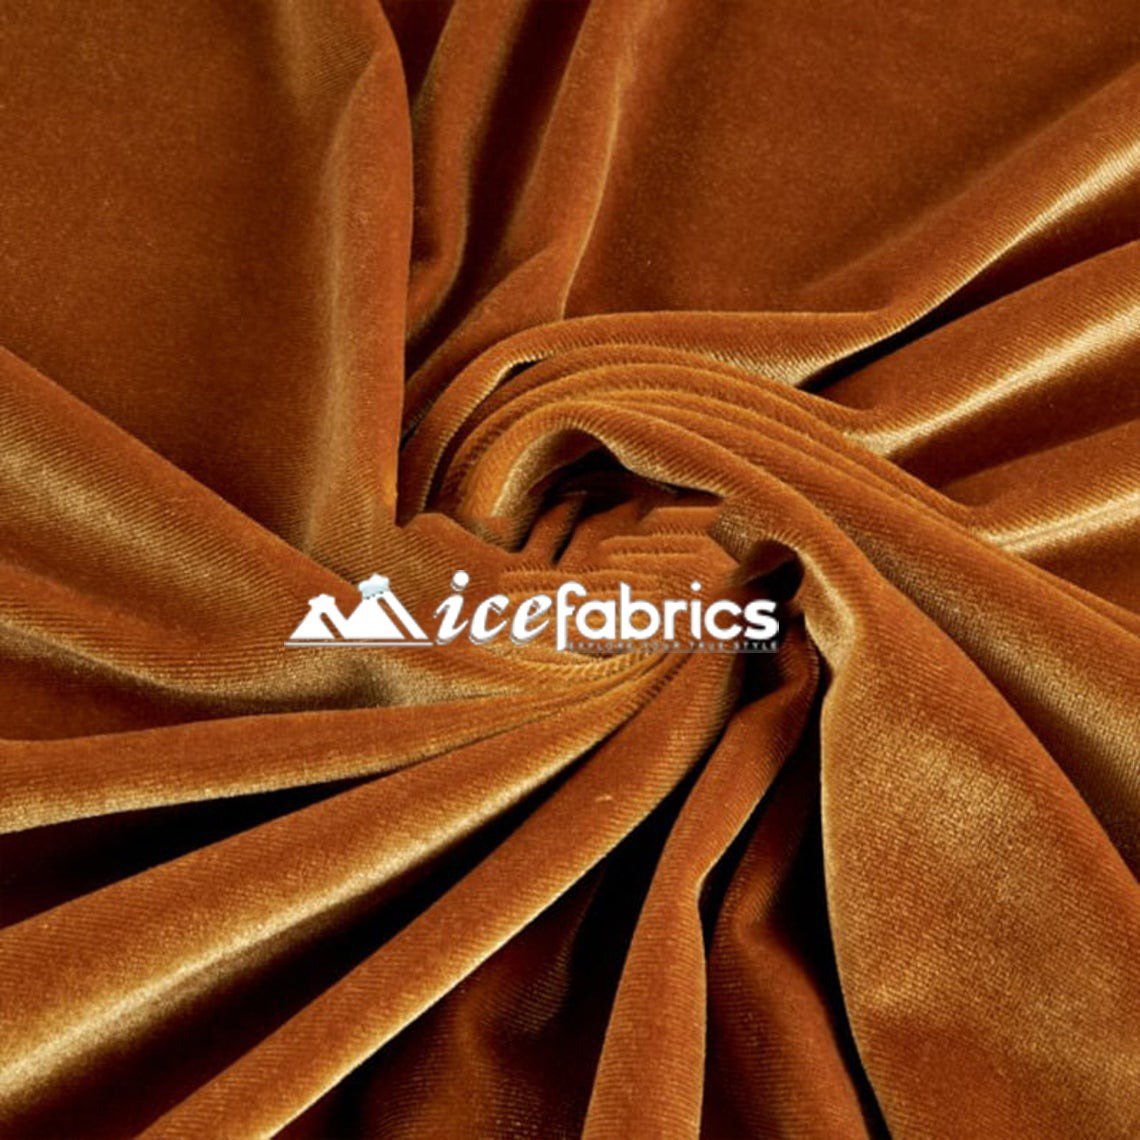 Hight Quality Stretch Velvet Fabric By The Roll (20 yards) Wholesale FabricVelvet FabricICE FABRICSICE FABRICSGoldBy The Roll (60" Wide)Hight Quality Stretch Velvet Fabric By The Roll (20 yards) Wholesale Fabric ICE FABRICS Gold